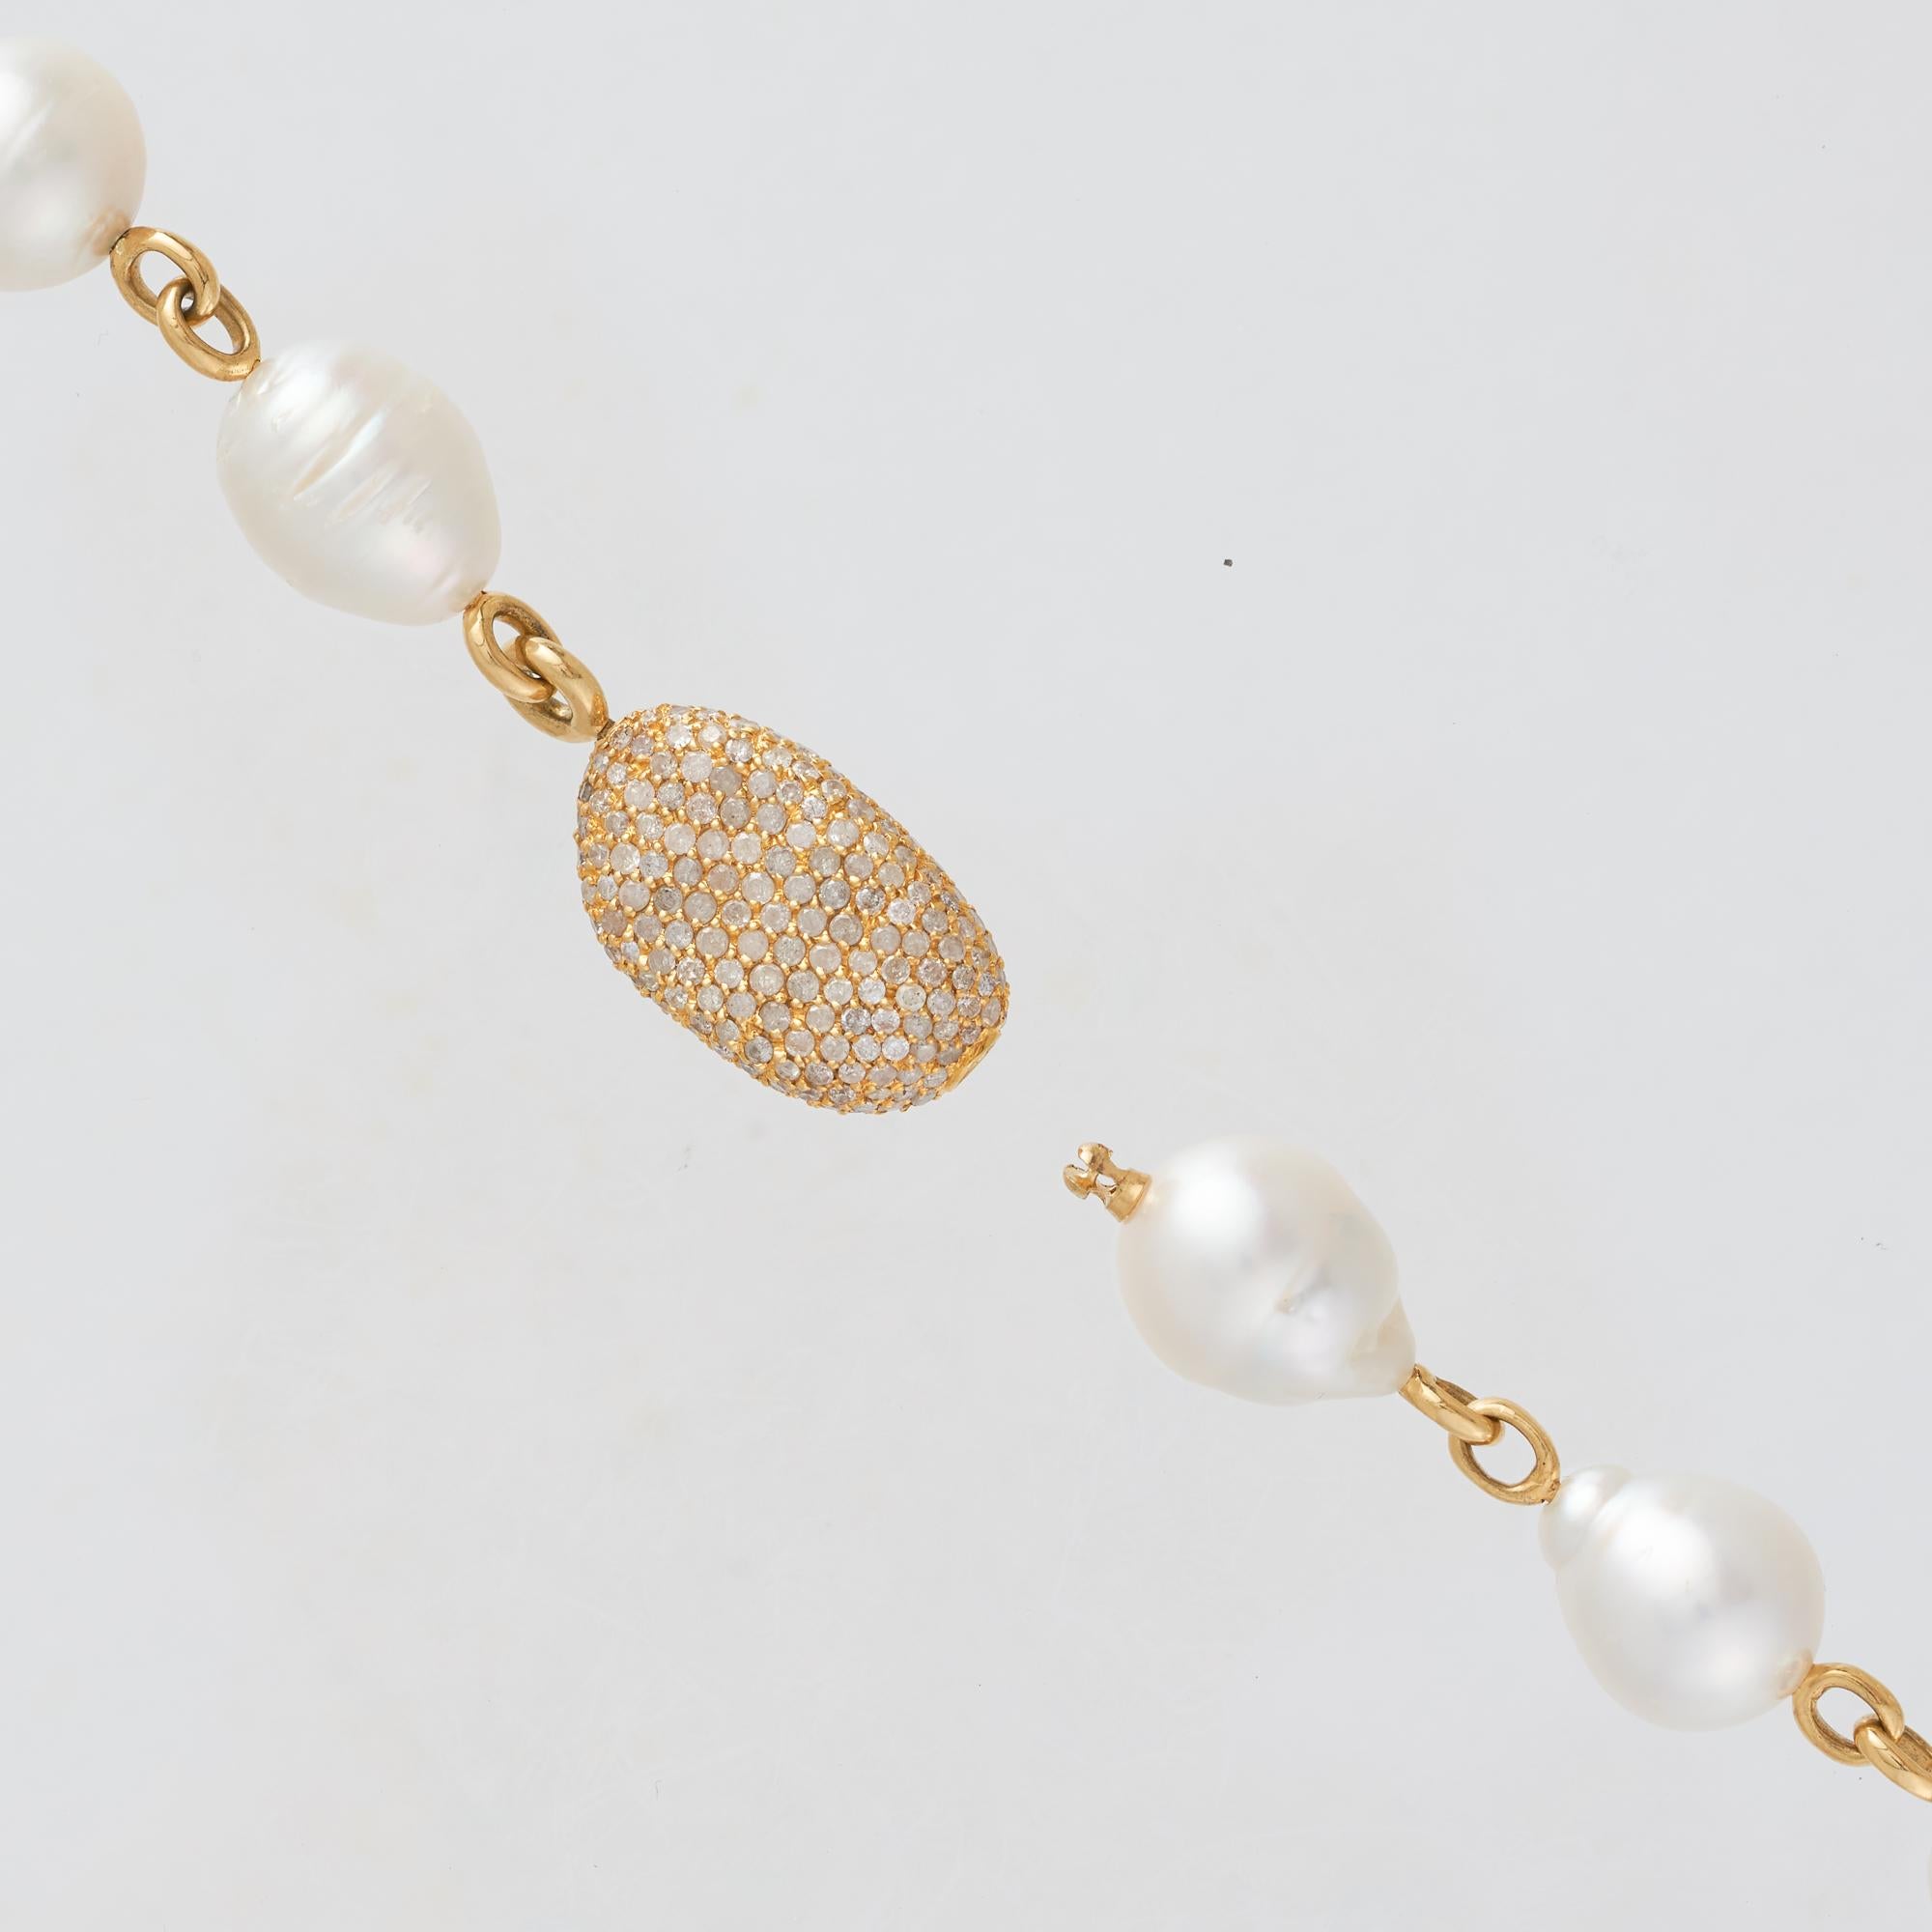 Margot McKinney 18 karat Yellow Gold South Sea Pearl and Diamond Pebble Necklet featuring forty-three 14-15.5mm white baroque Australian South Sea pearls, one 18 karat Yellow Gold pave set Diamond Pebble, all joined with 18 karat Yellow Gold fancy